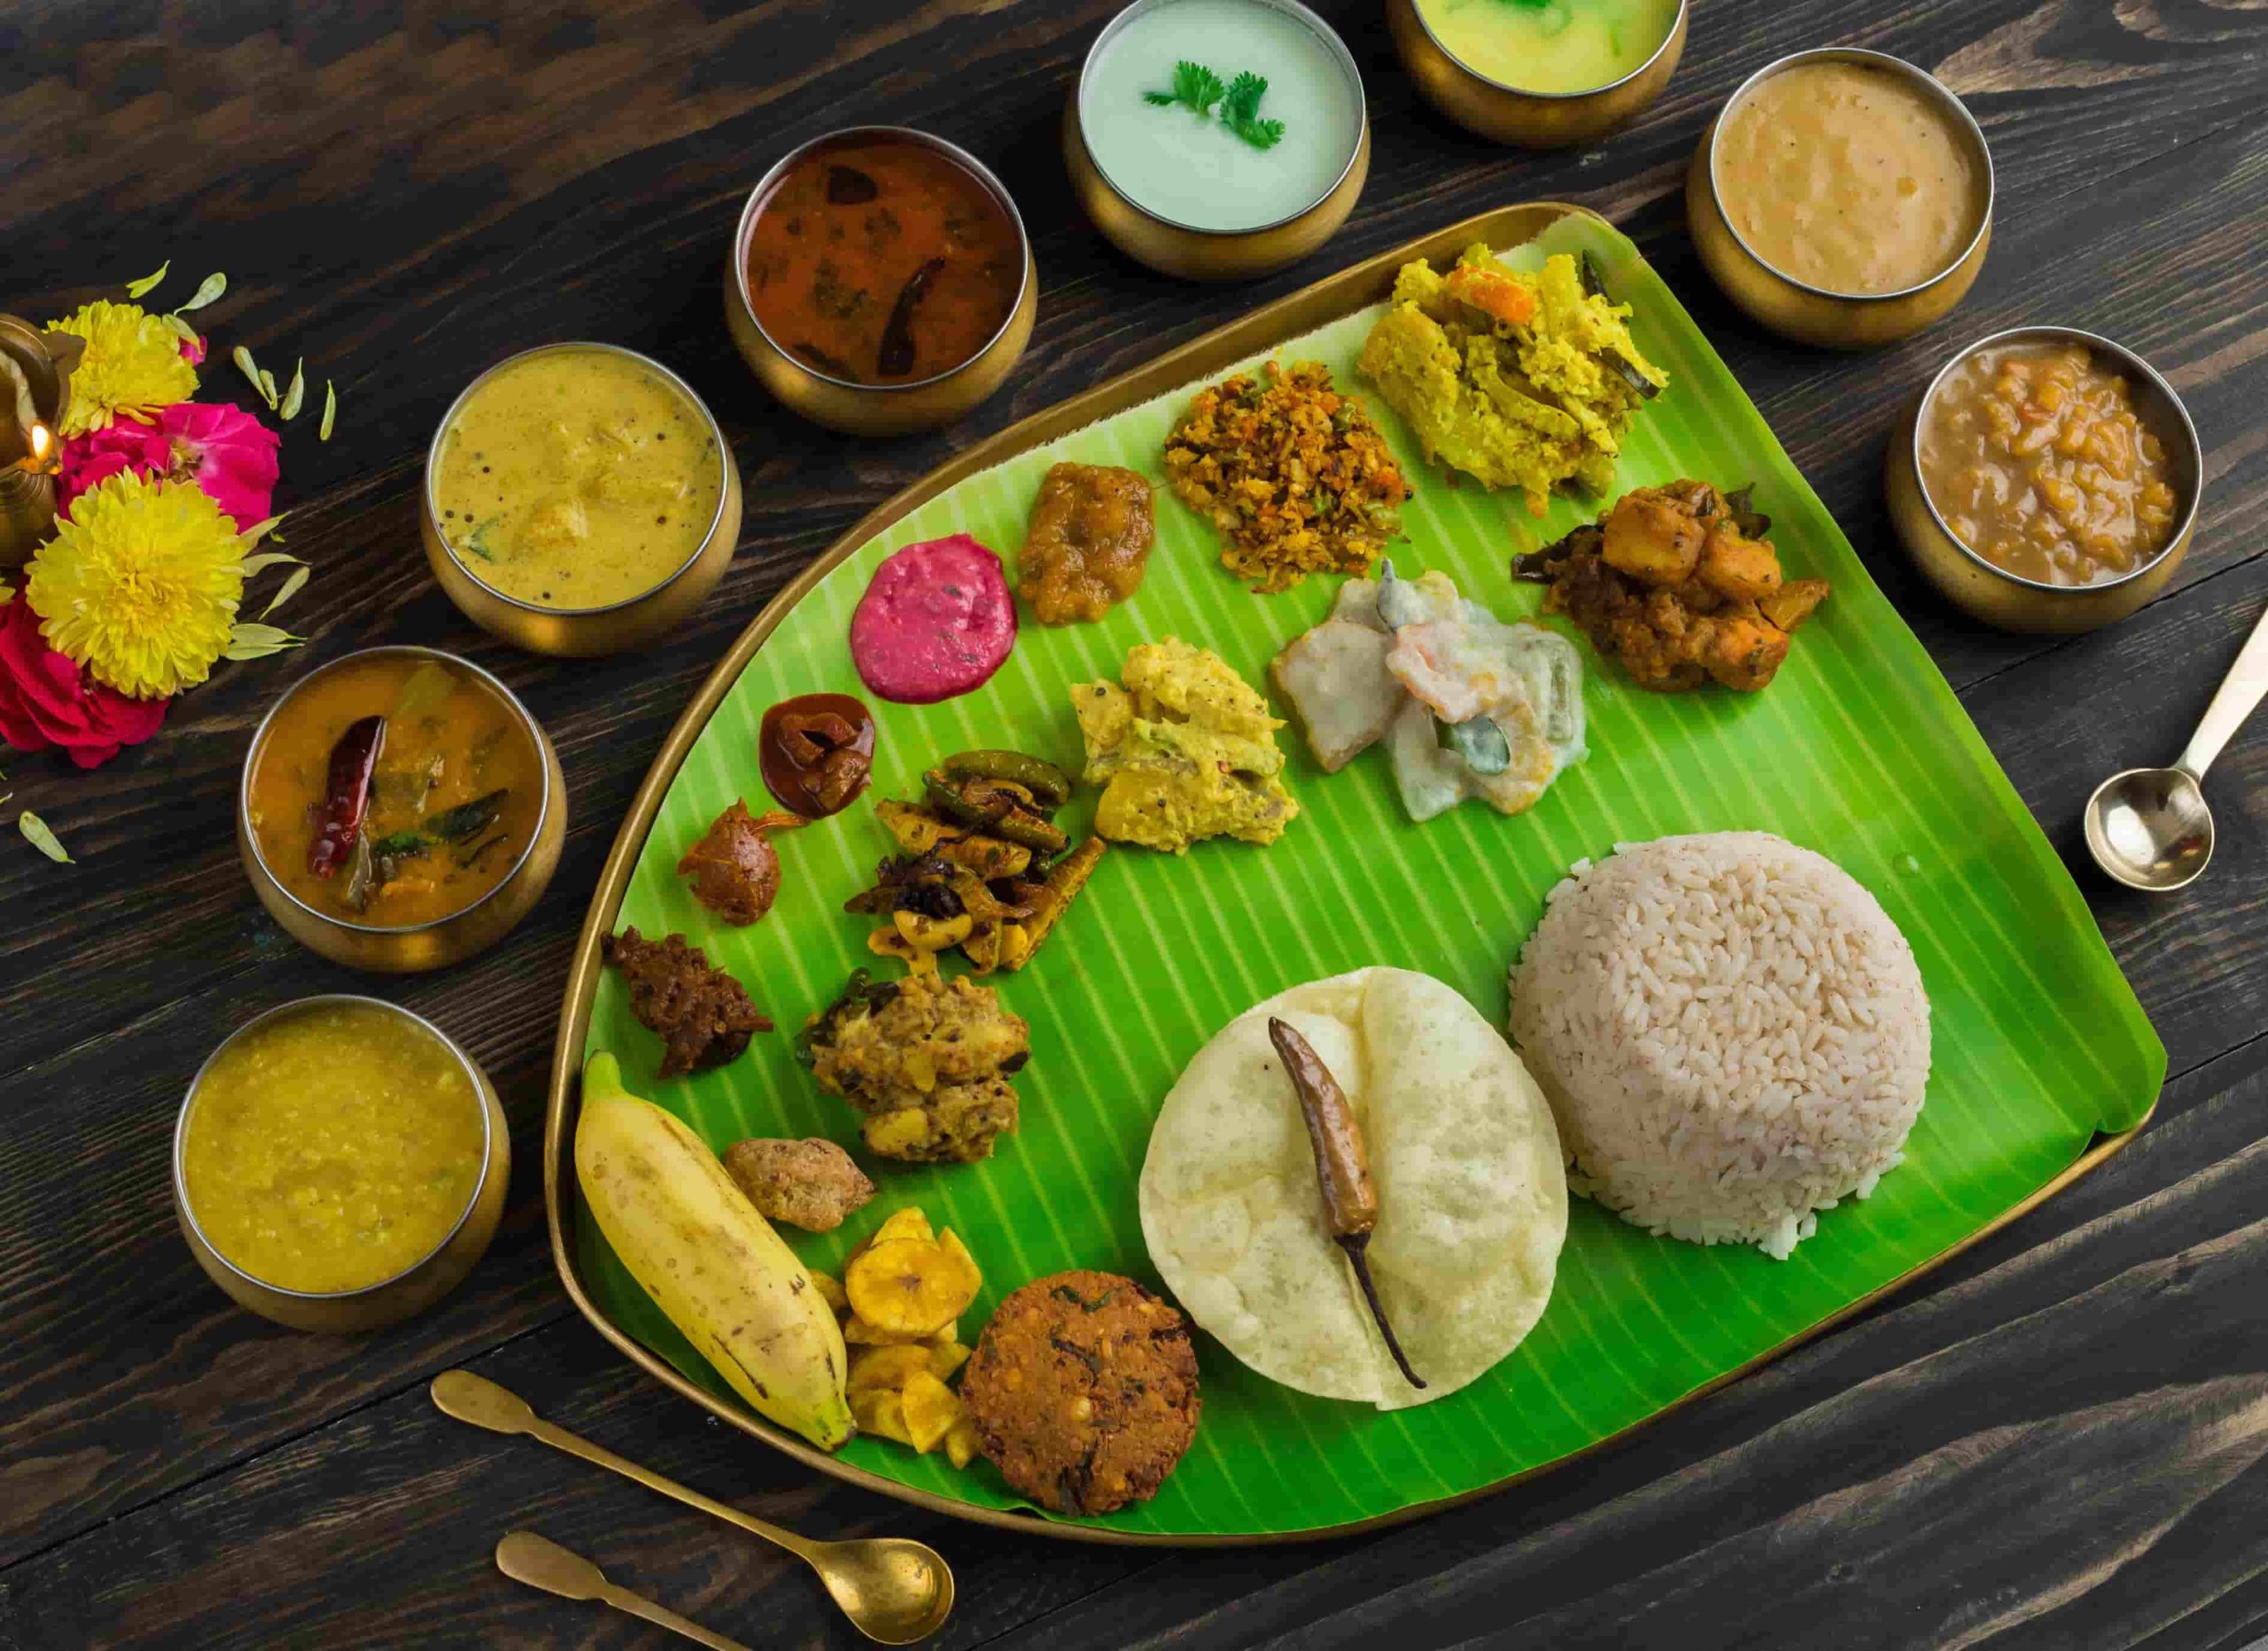 Celebrate the homecoming of the Emperor Mahabali with Kerala cuisine in Delhi